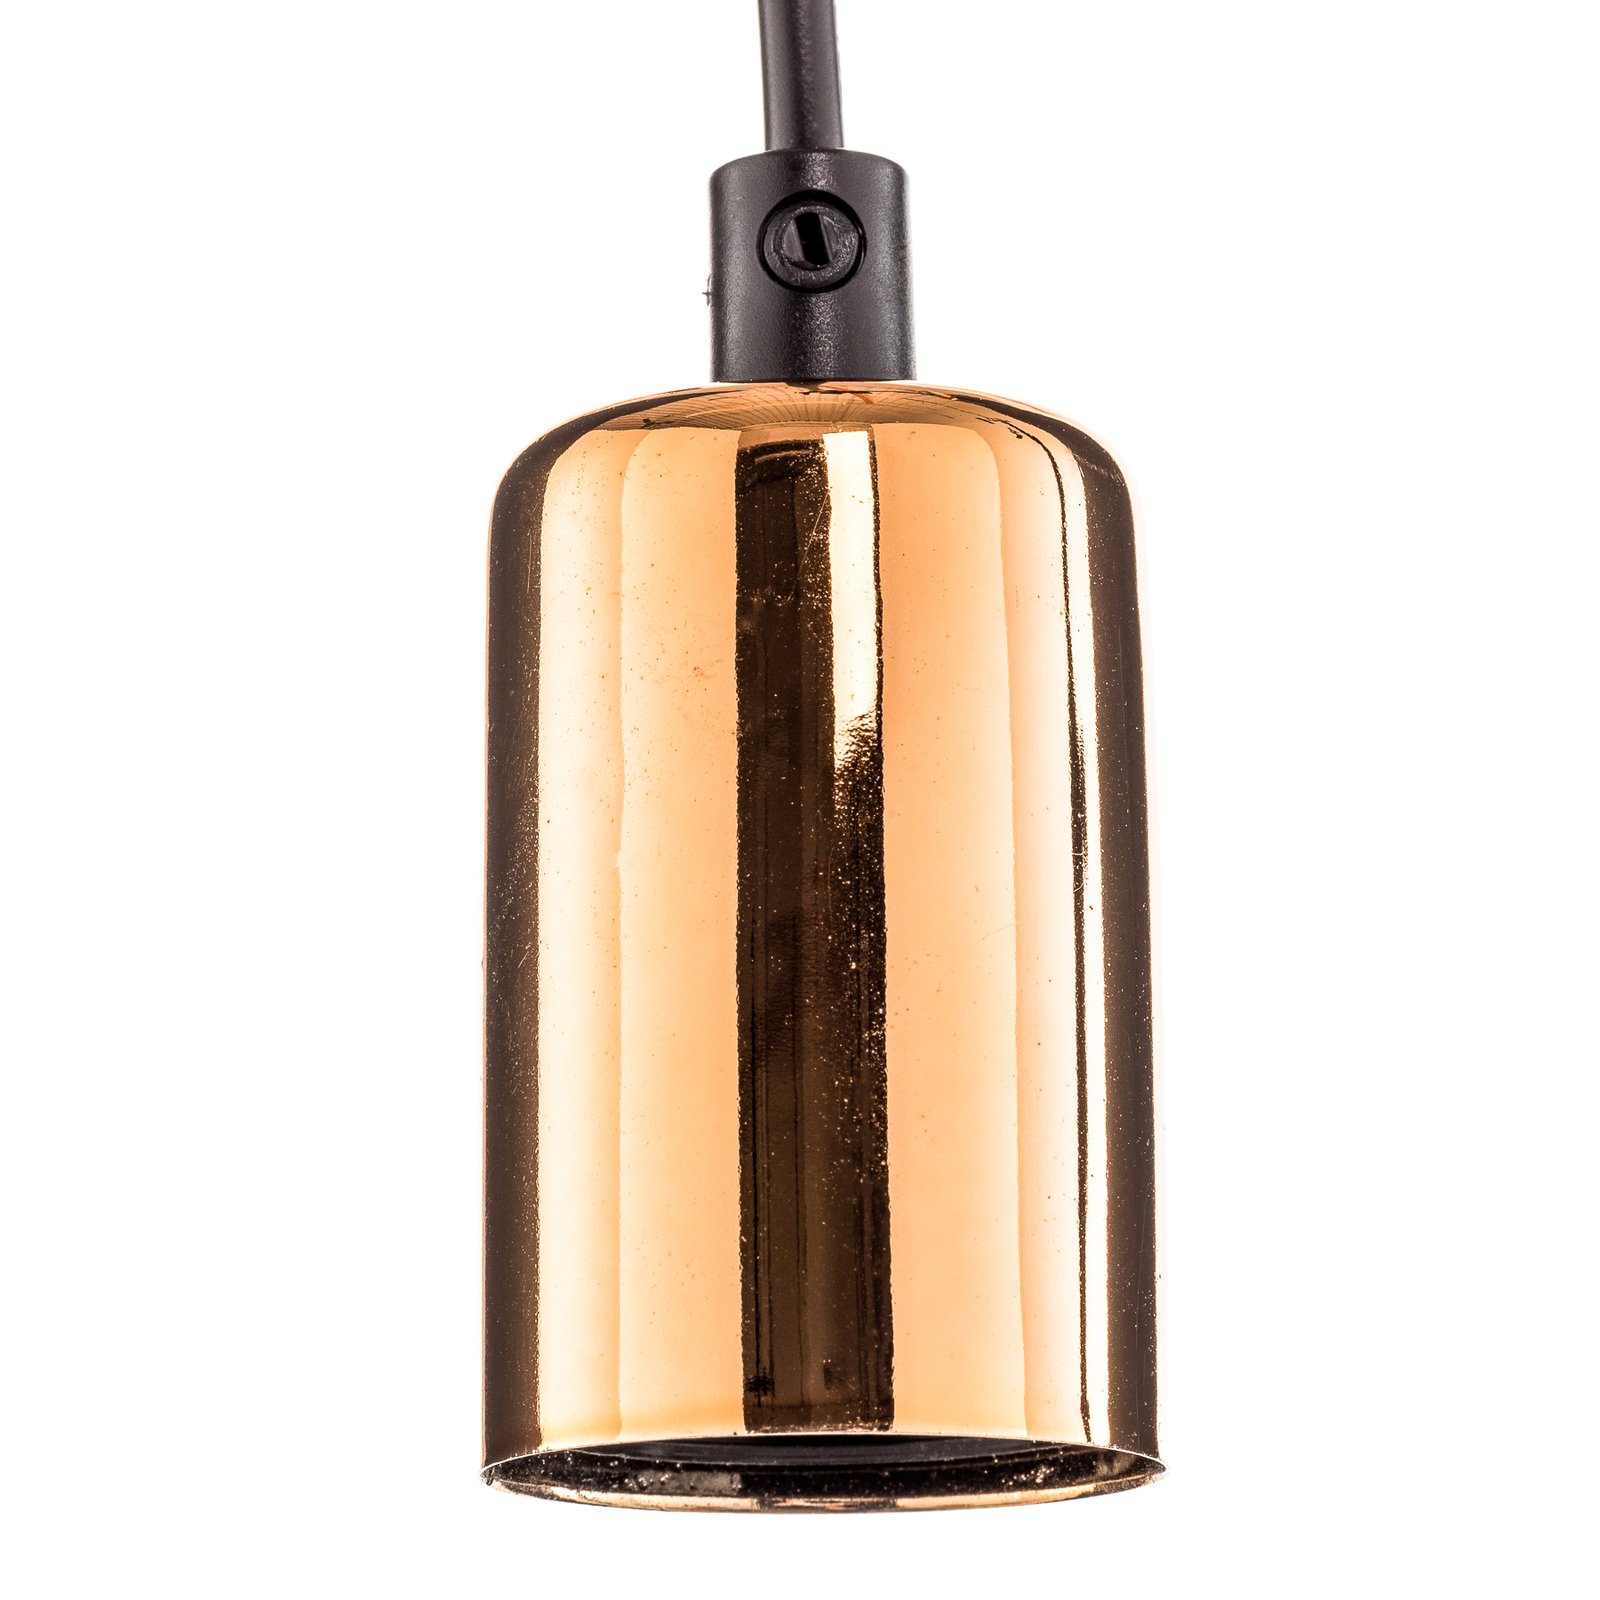 Spark K1 wall light in black and copper